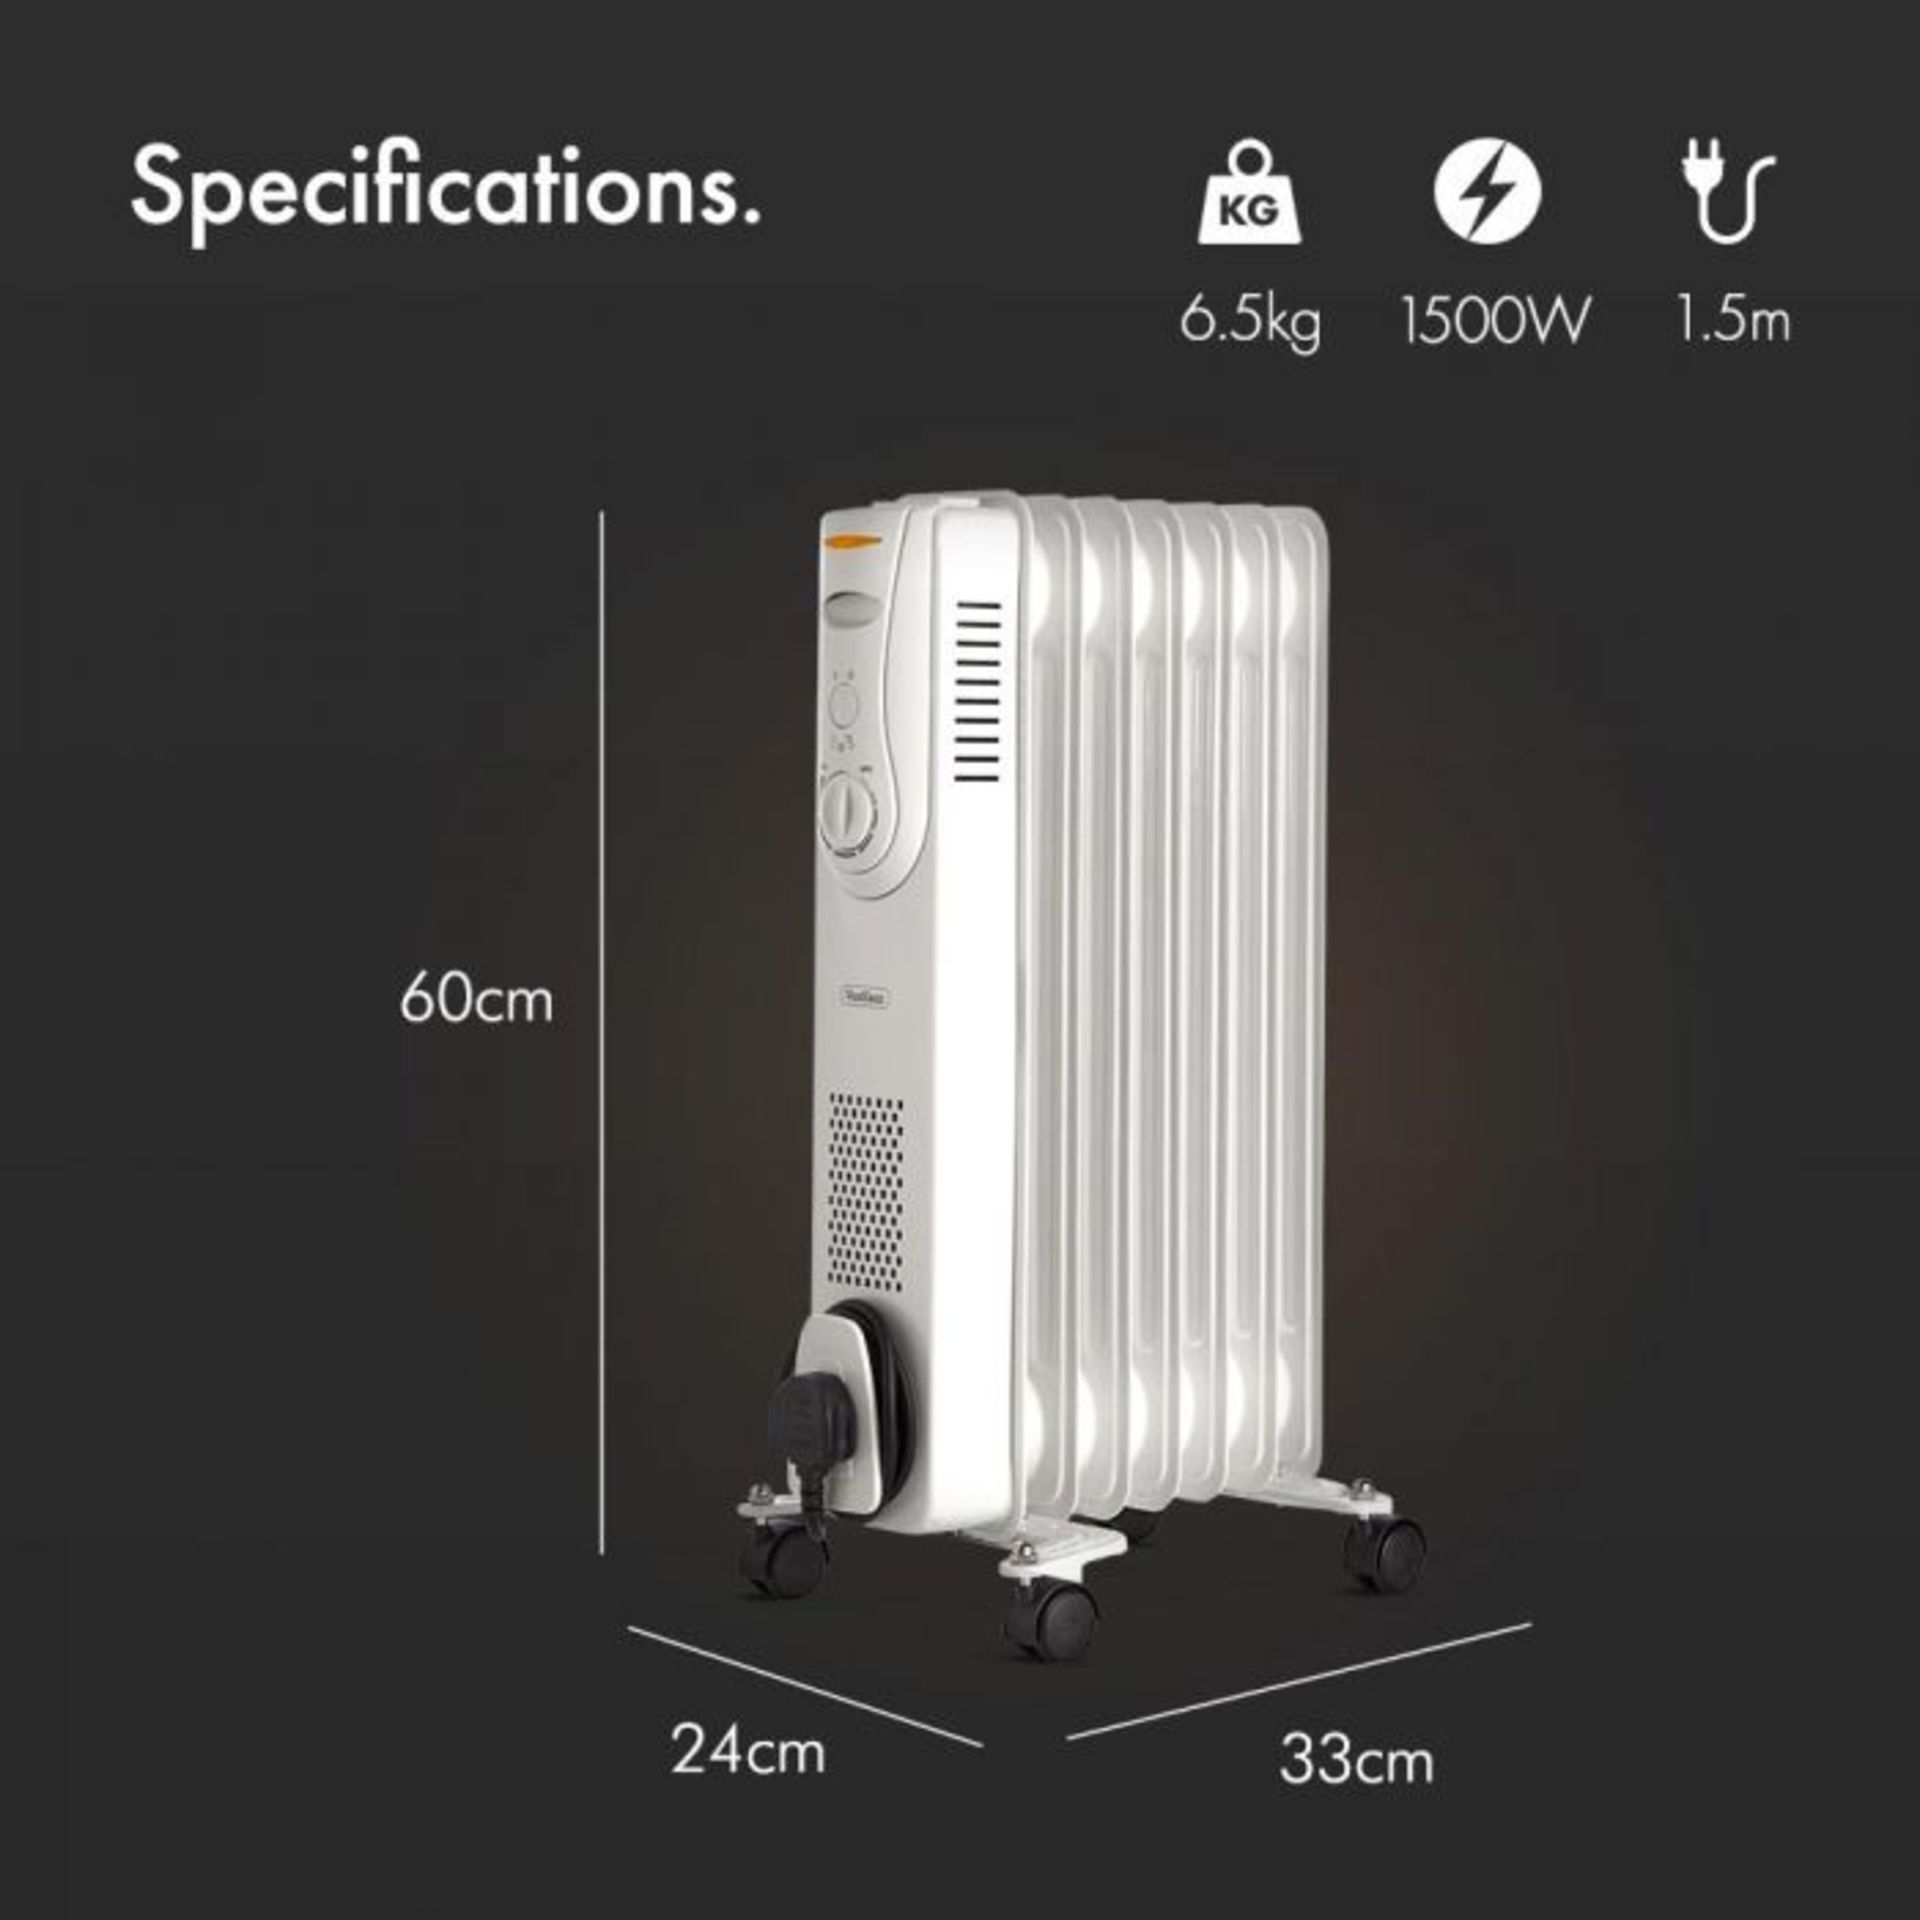 (S91) 7 Fin 1500W Oil Filled Radiator - White Powerful 1500W radiator with 7 oil-filled fins ?... - Image 3 of 3